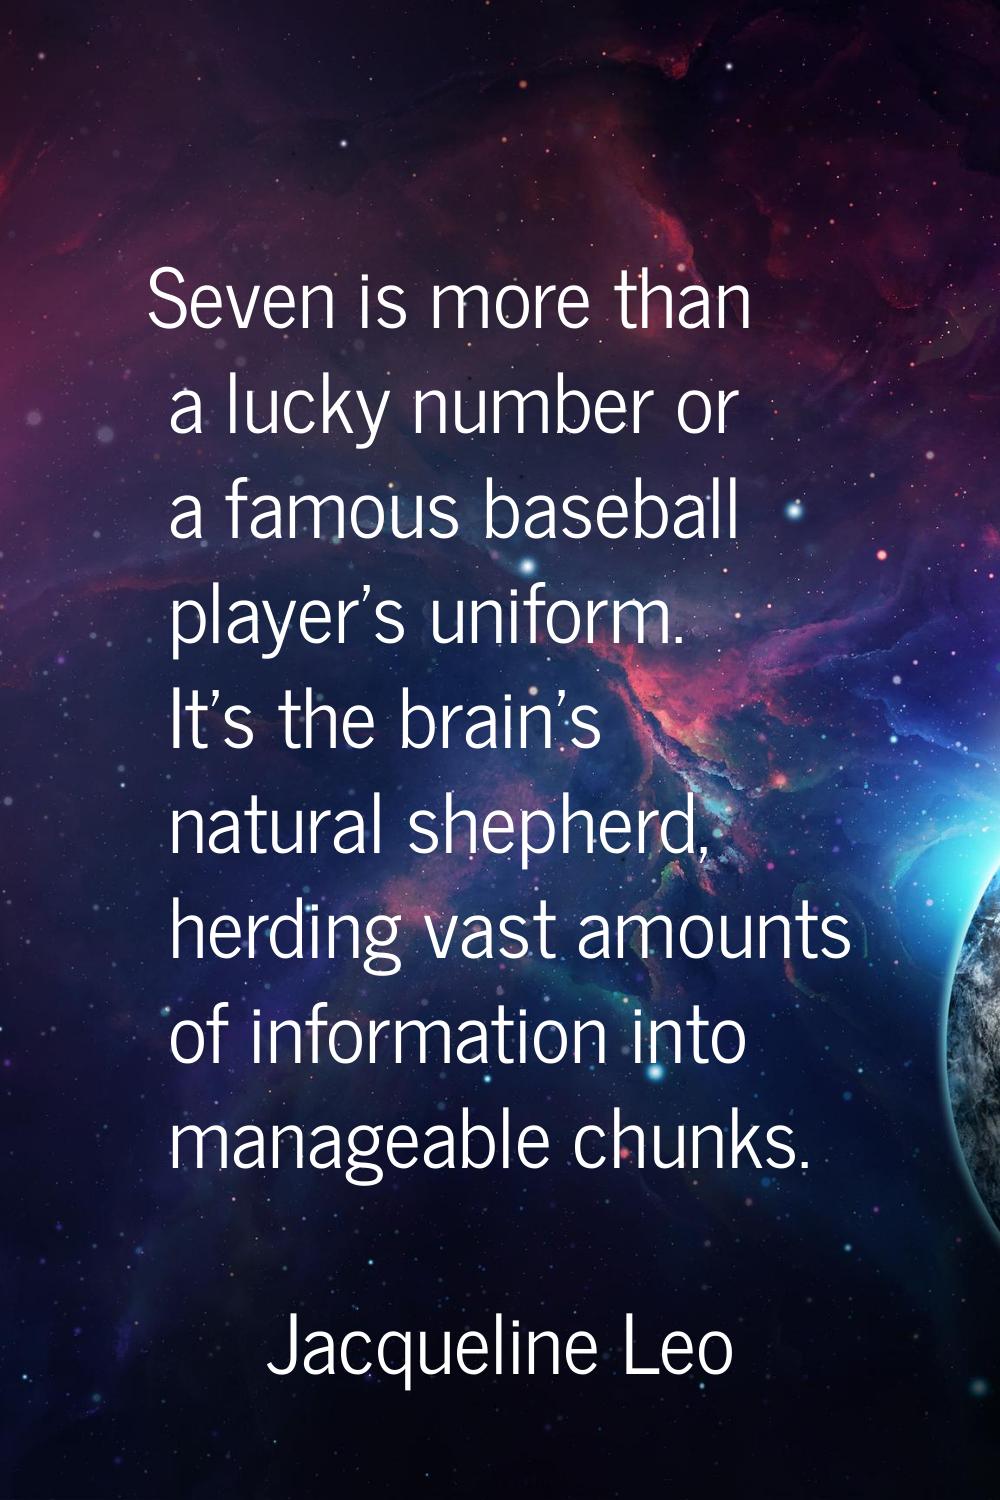 Seven is more than a lucky number or a famous baseball player's uniform. It's the brain's natural s